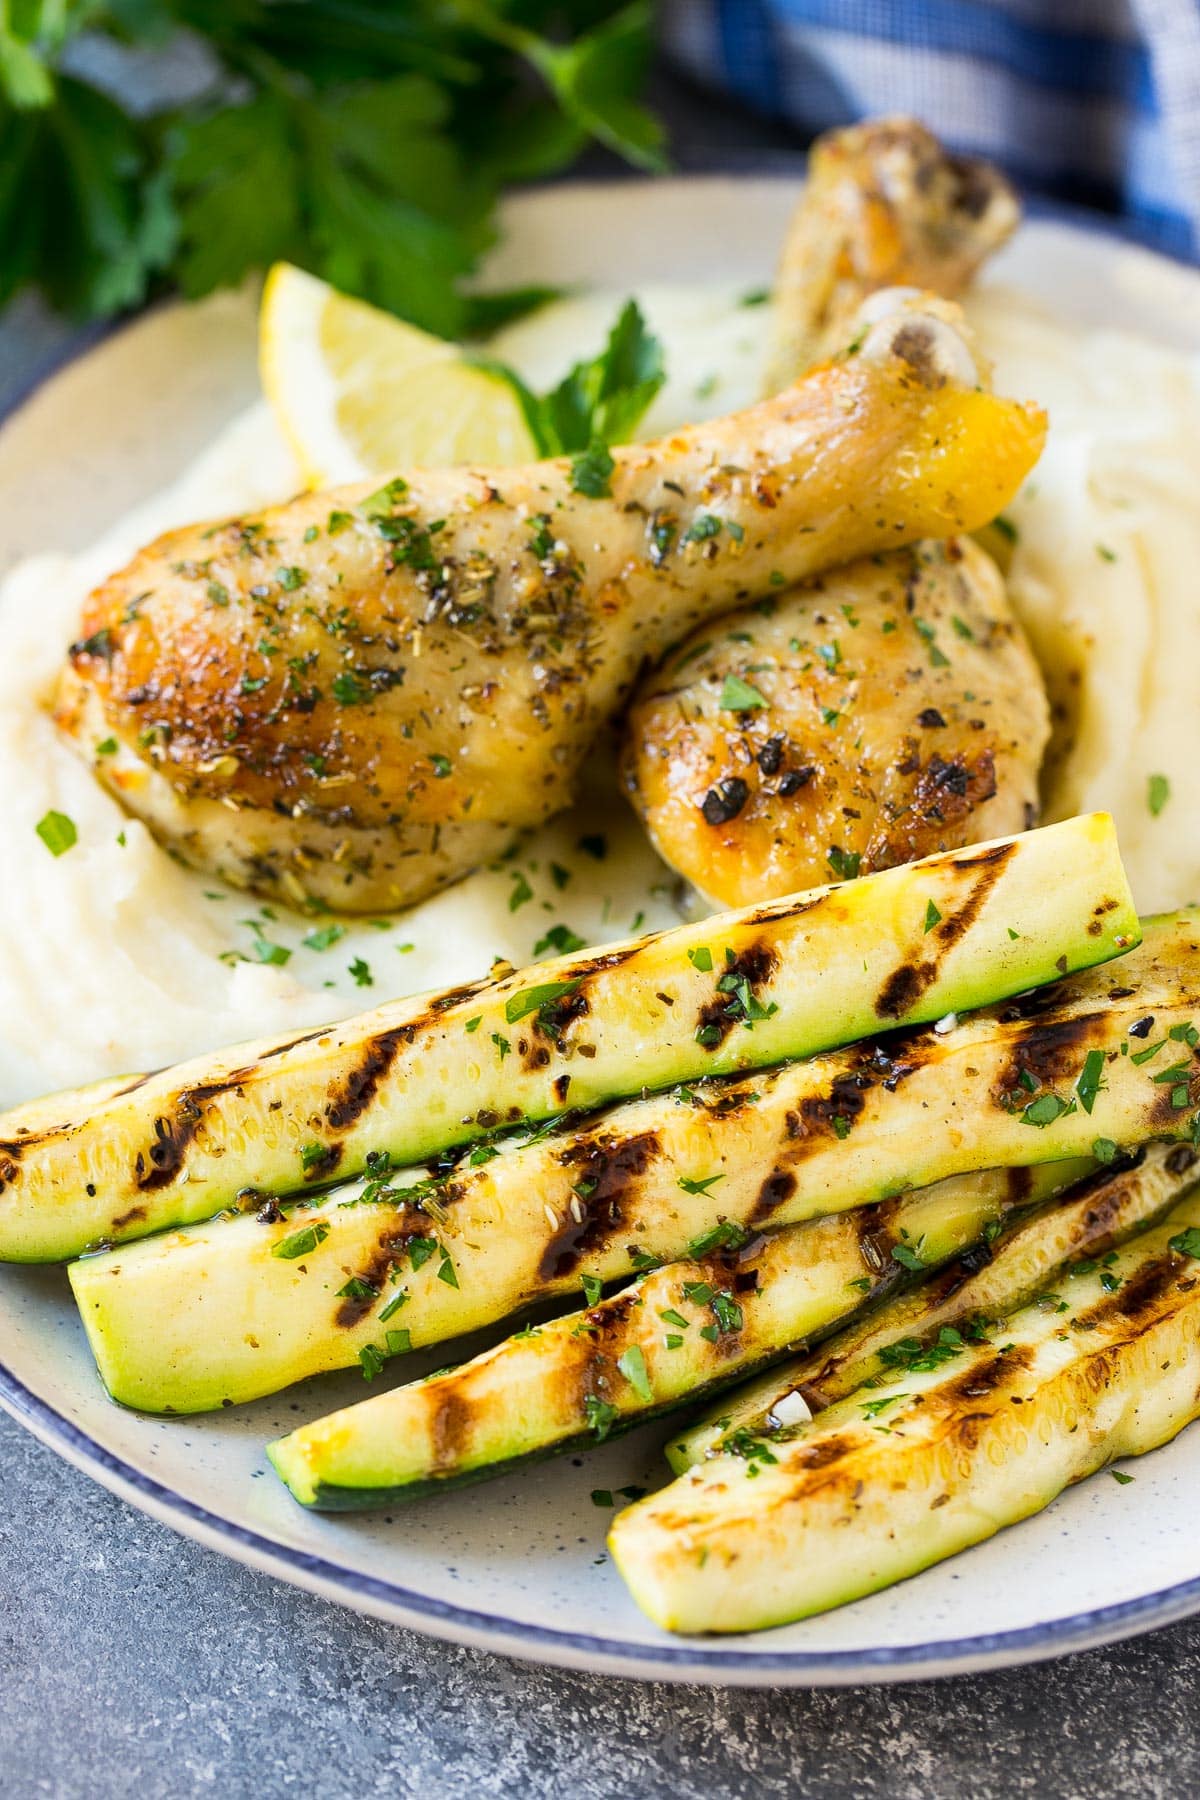 Grilled zucchini served with mashed potatoes and chicken.